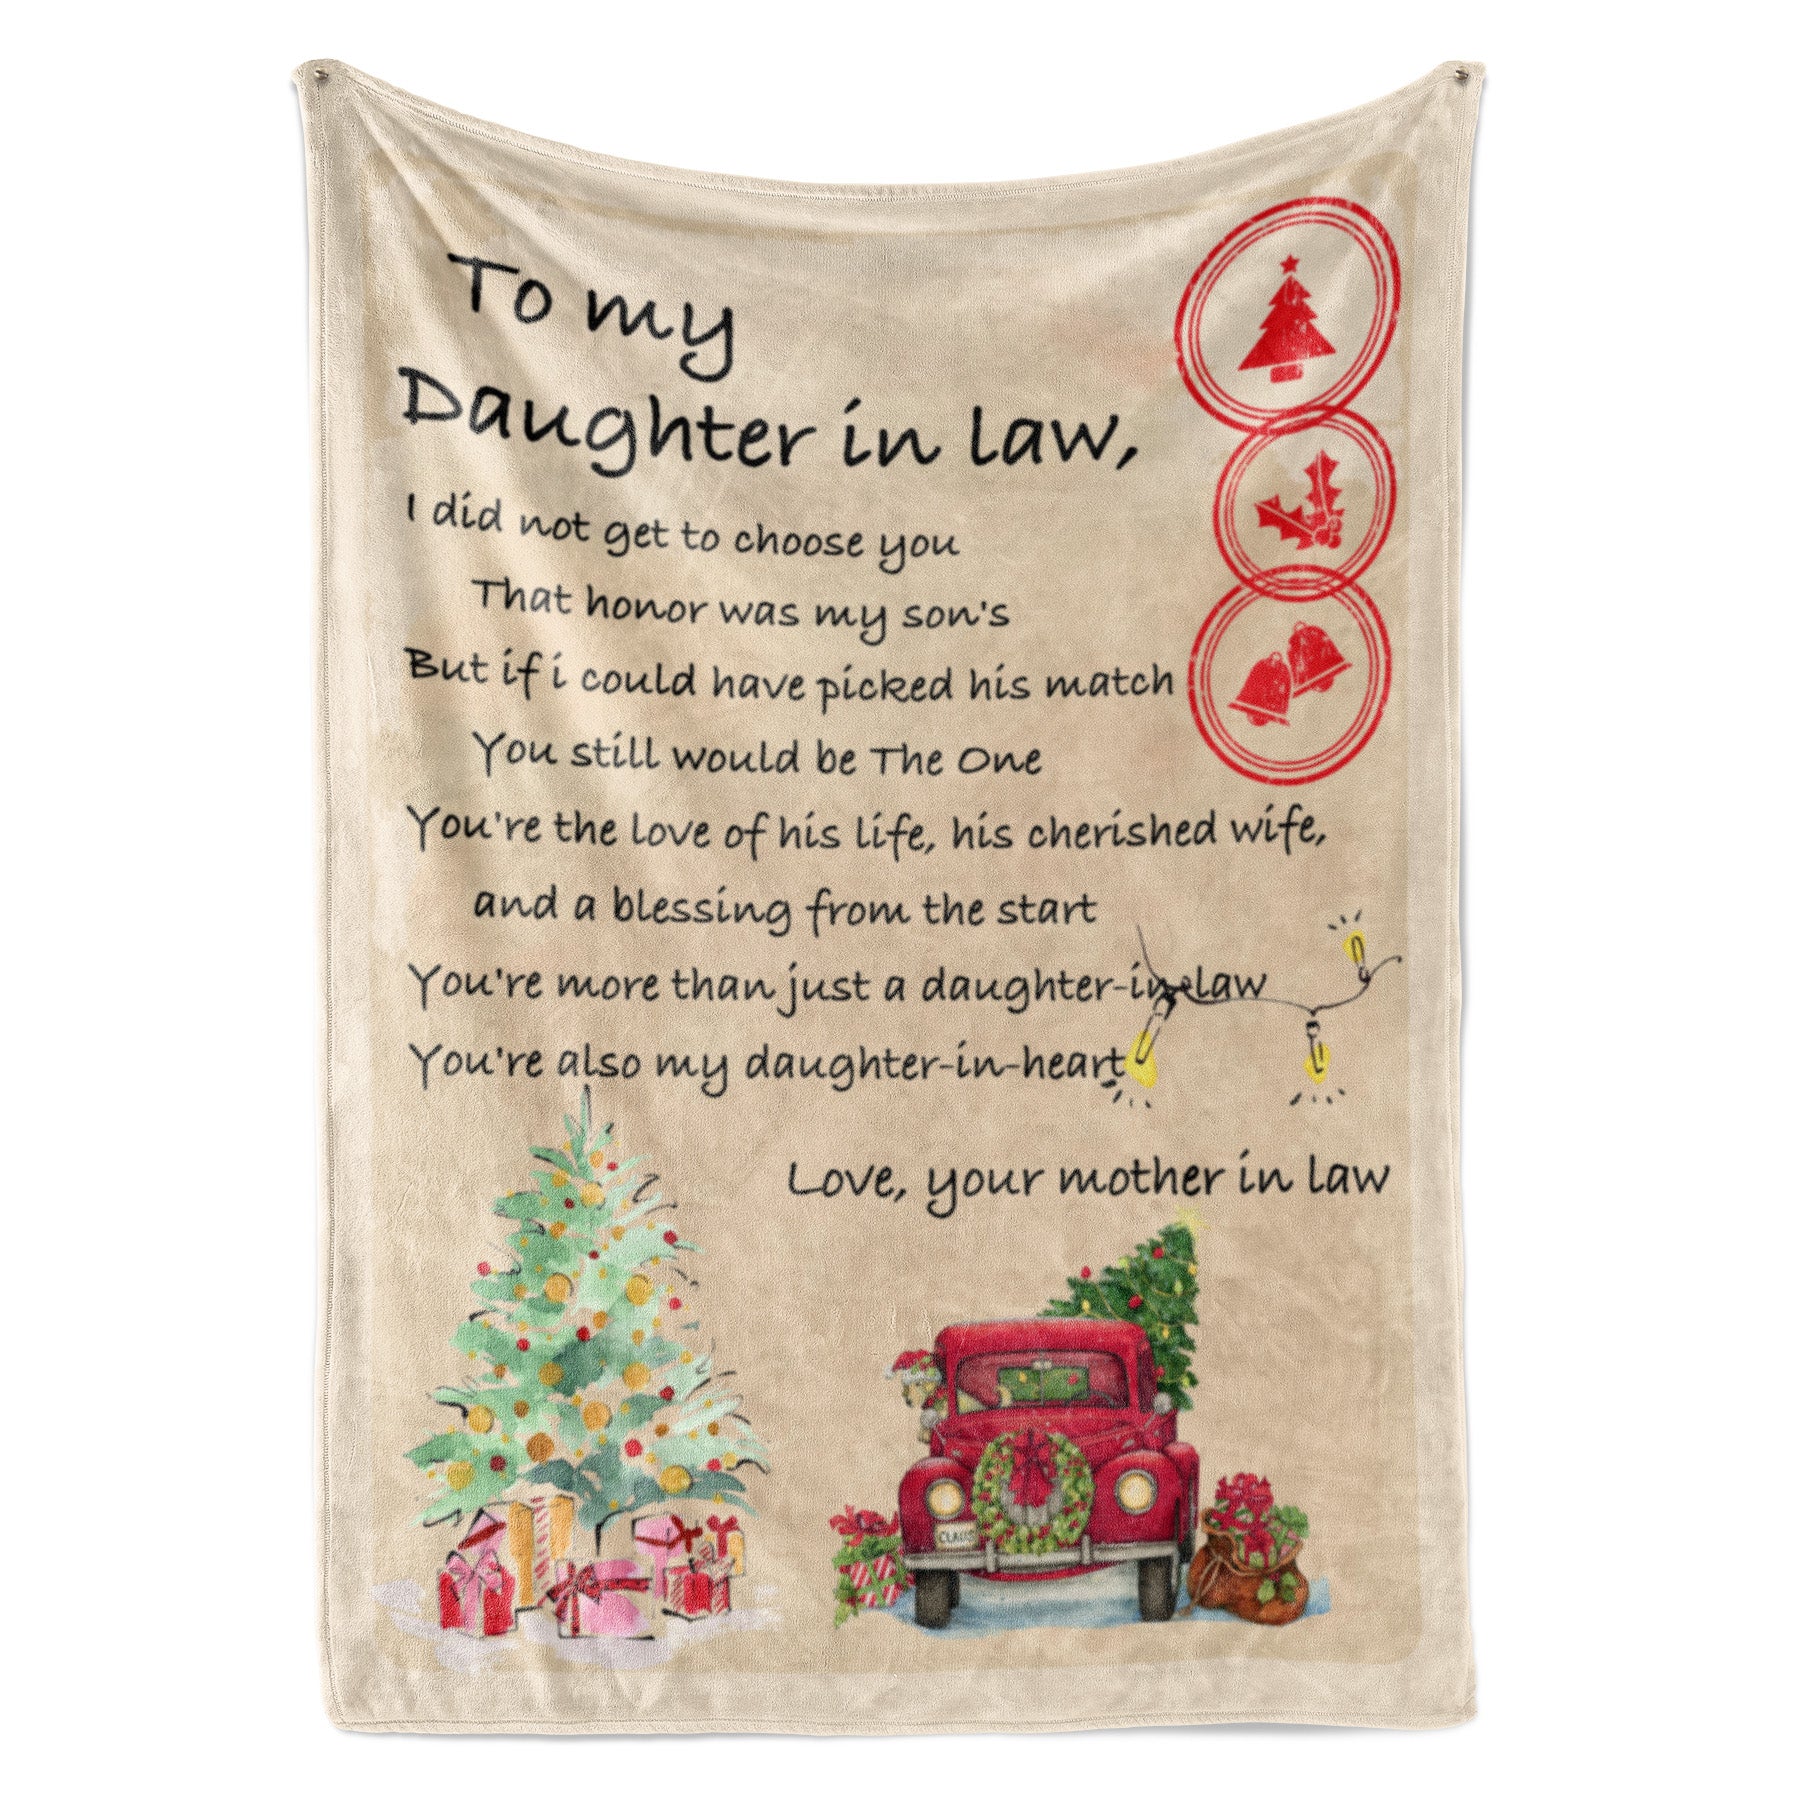 Christmas Blanket Gift For Daughter In Law, New Daughter In Law Gifts, Get to Choose You